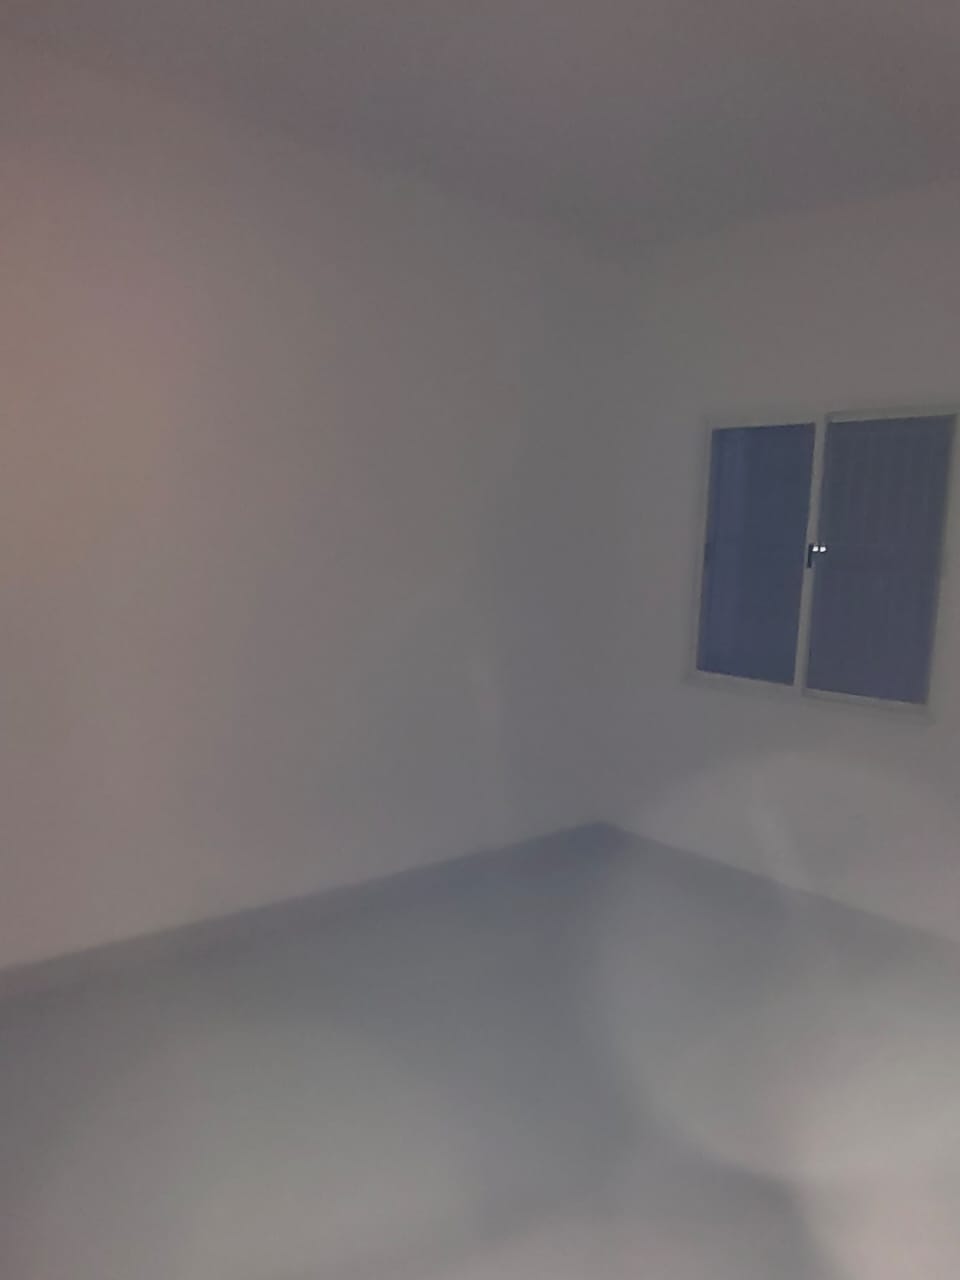 2 BHK Residential Apartment for Lease Only at JAML2 - 3524-21lakh in Garvebhavipalya